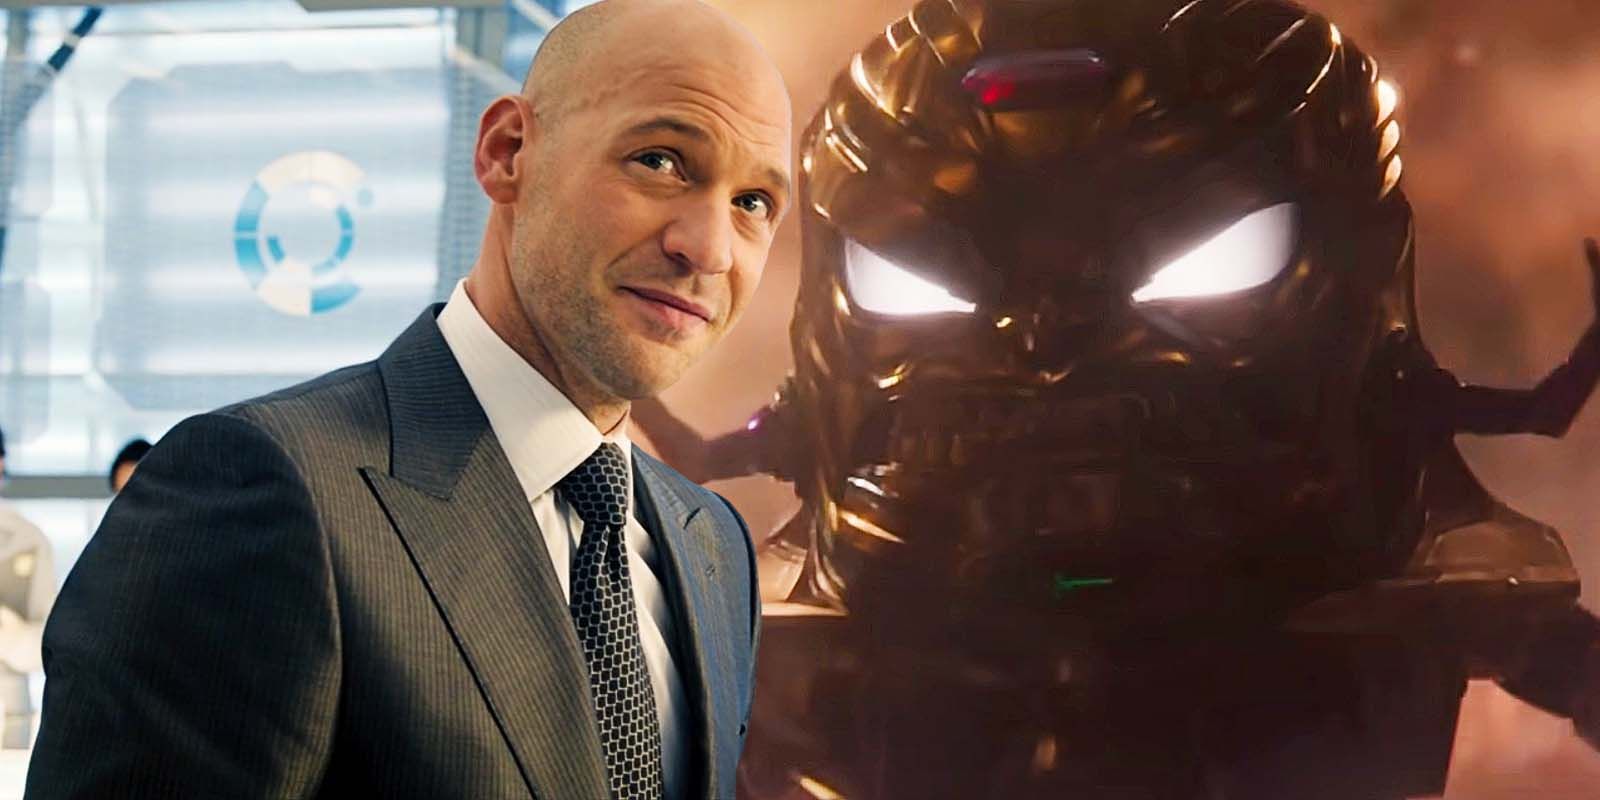 Corey Stoll as Darren Cross in Ant-Man and as Modok in Ant-Man & The Wasp Quantumania